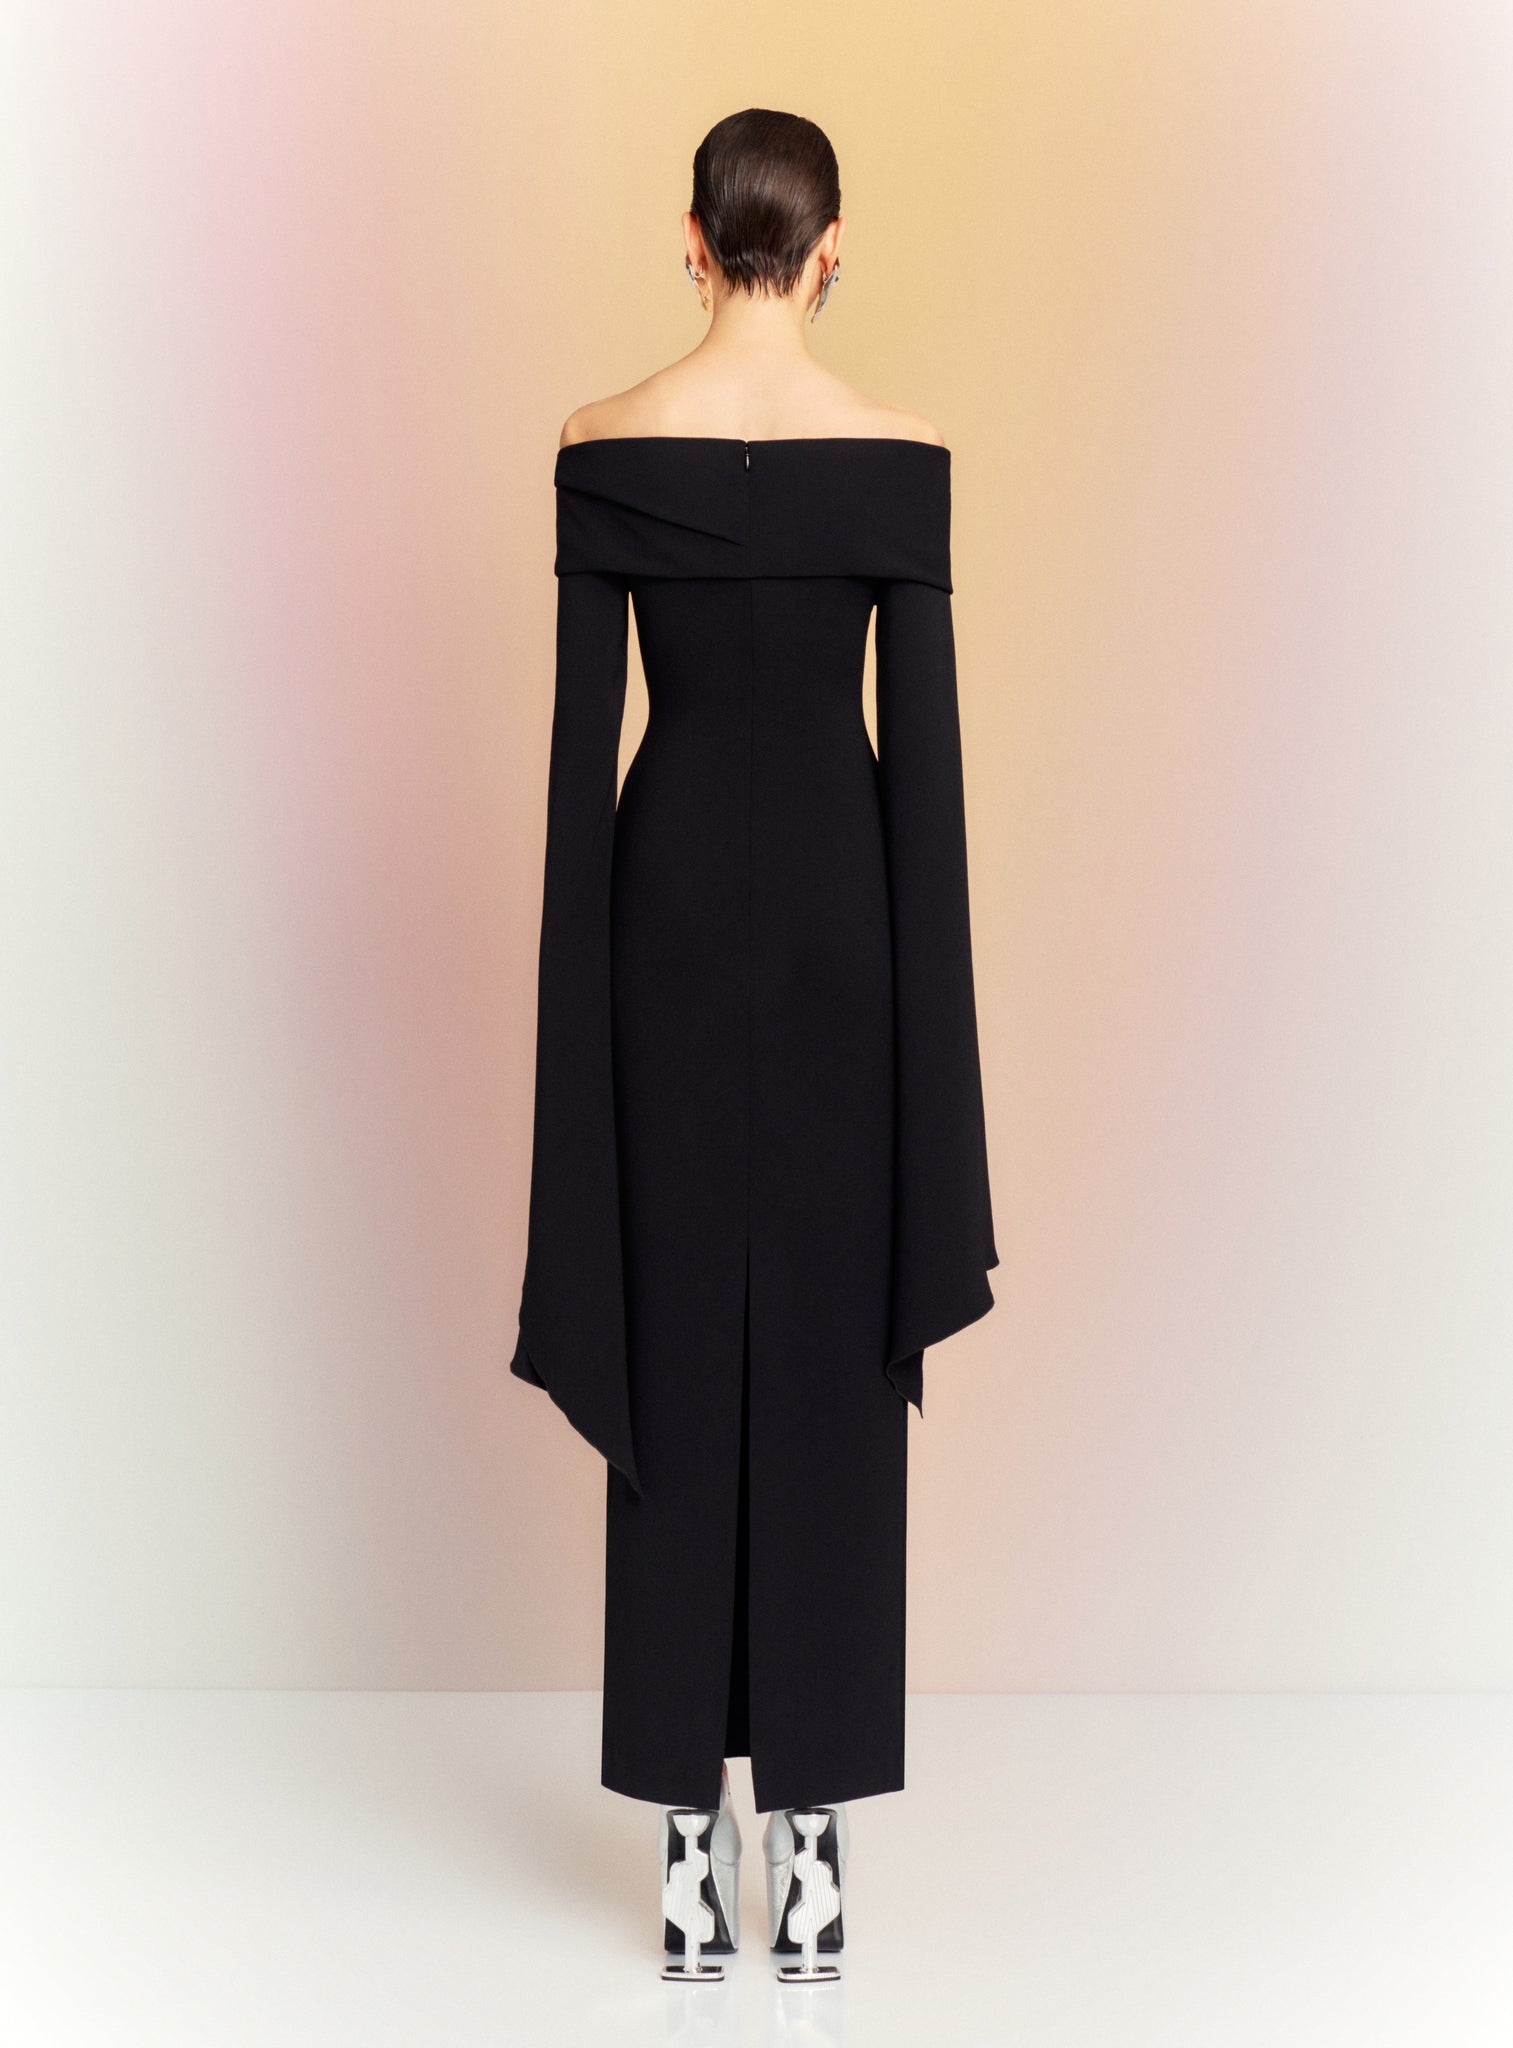 The Arden Maxi Dress in Black